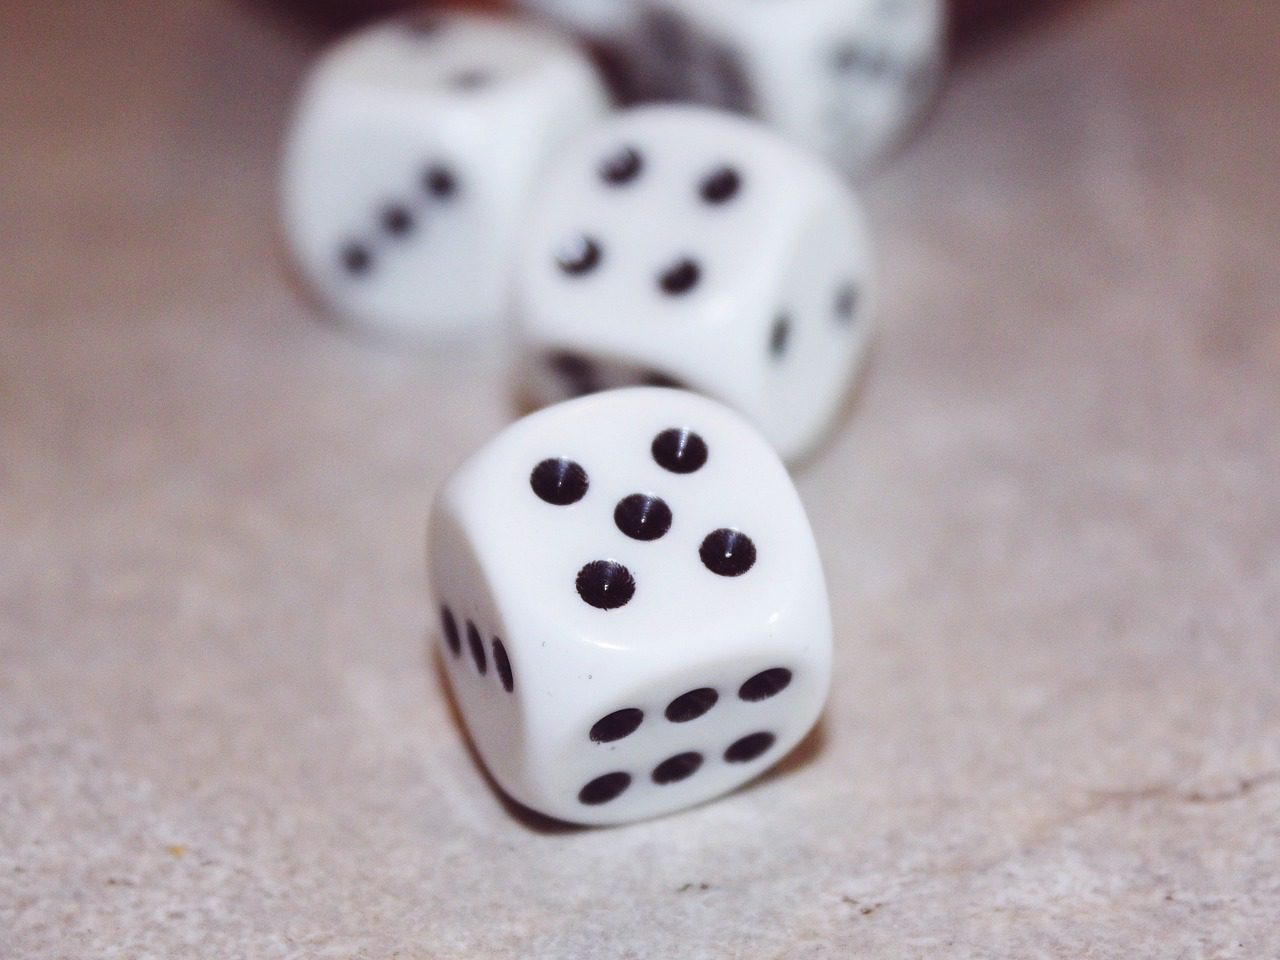 Several dice rolling across a surface, a die with the number five is in foreground.